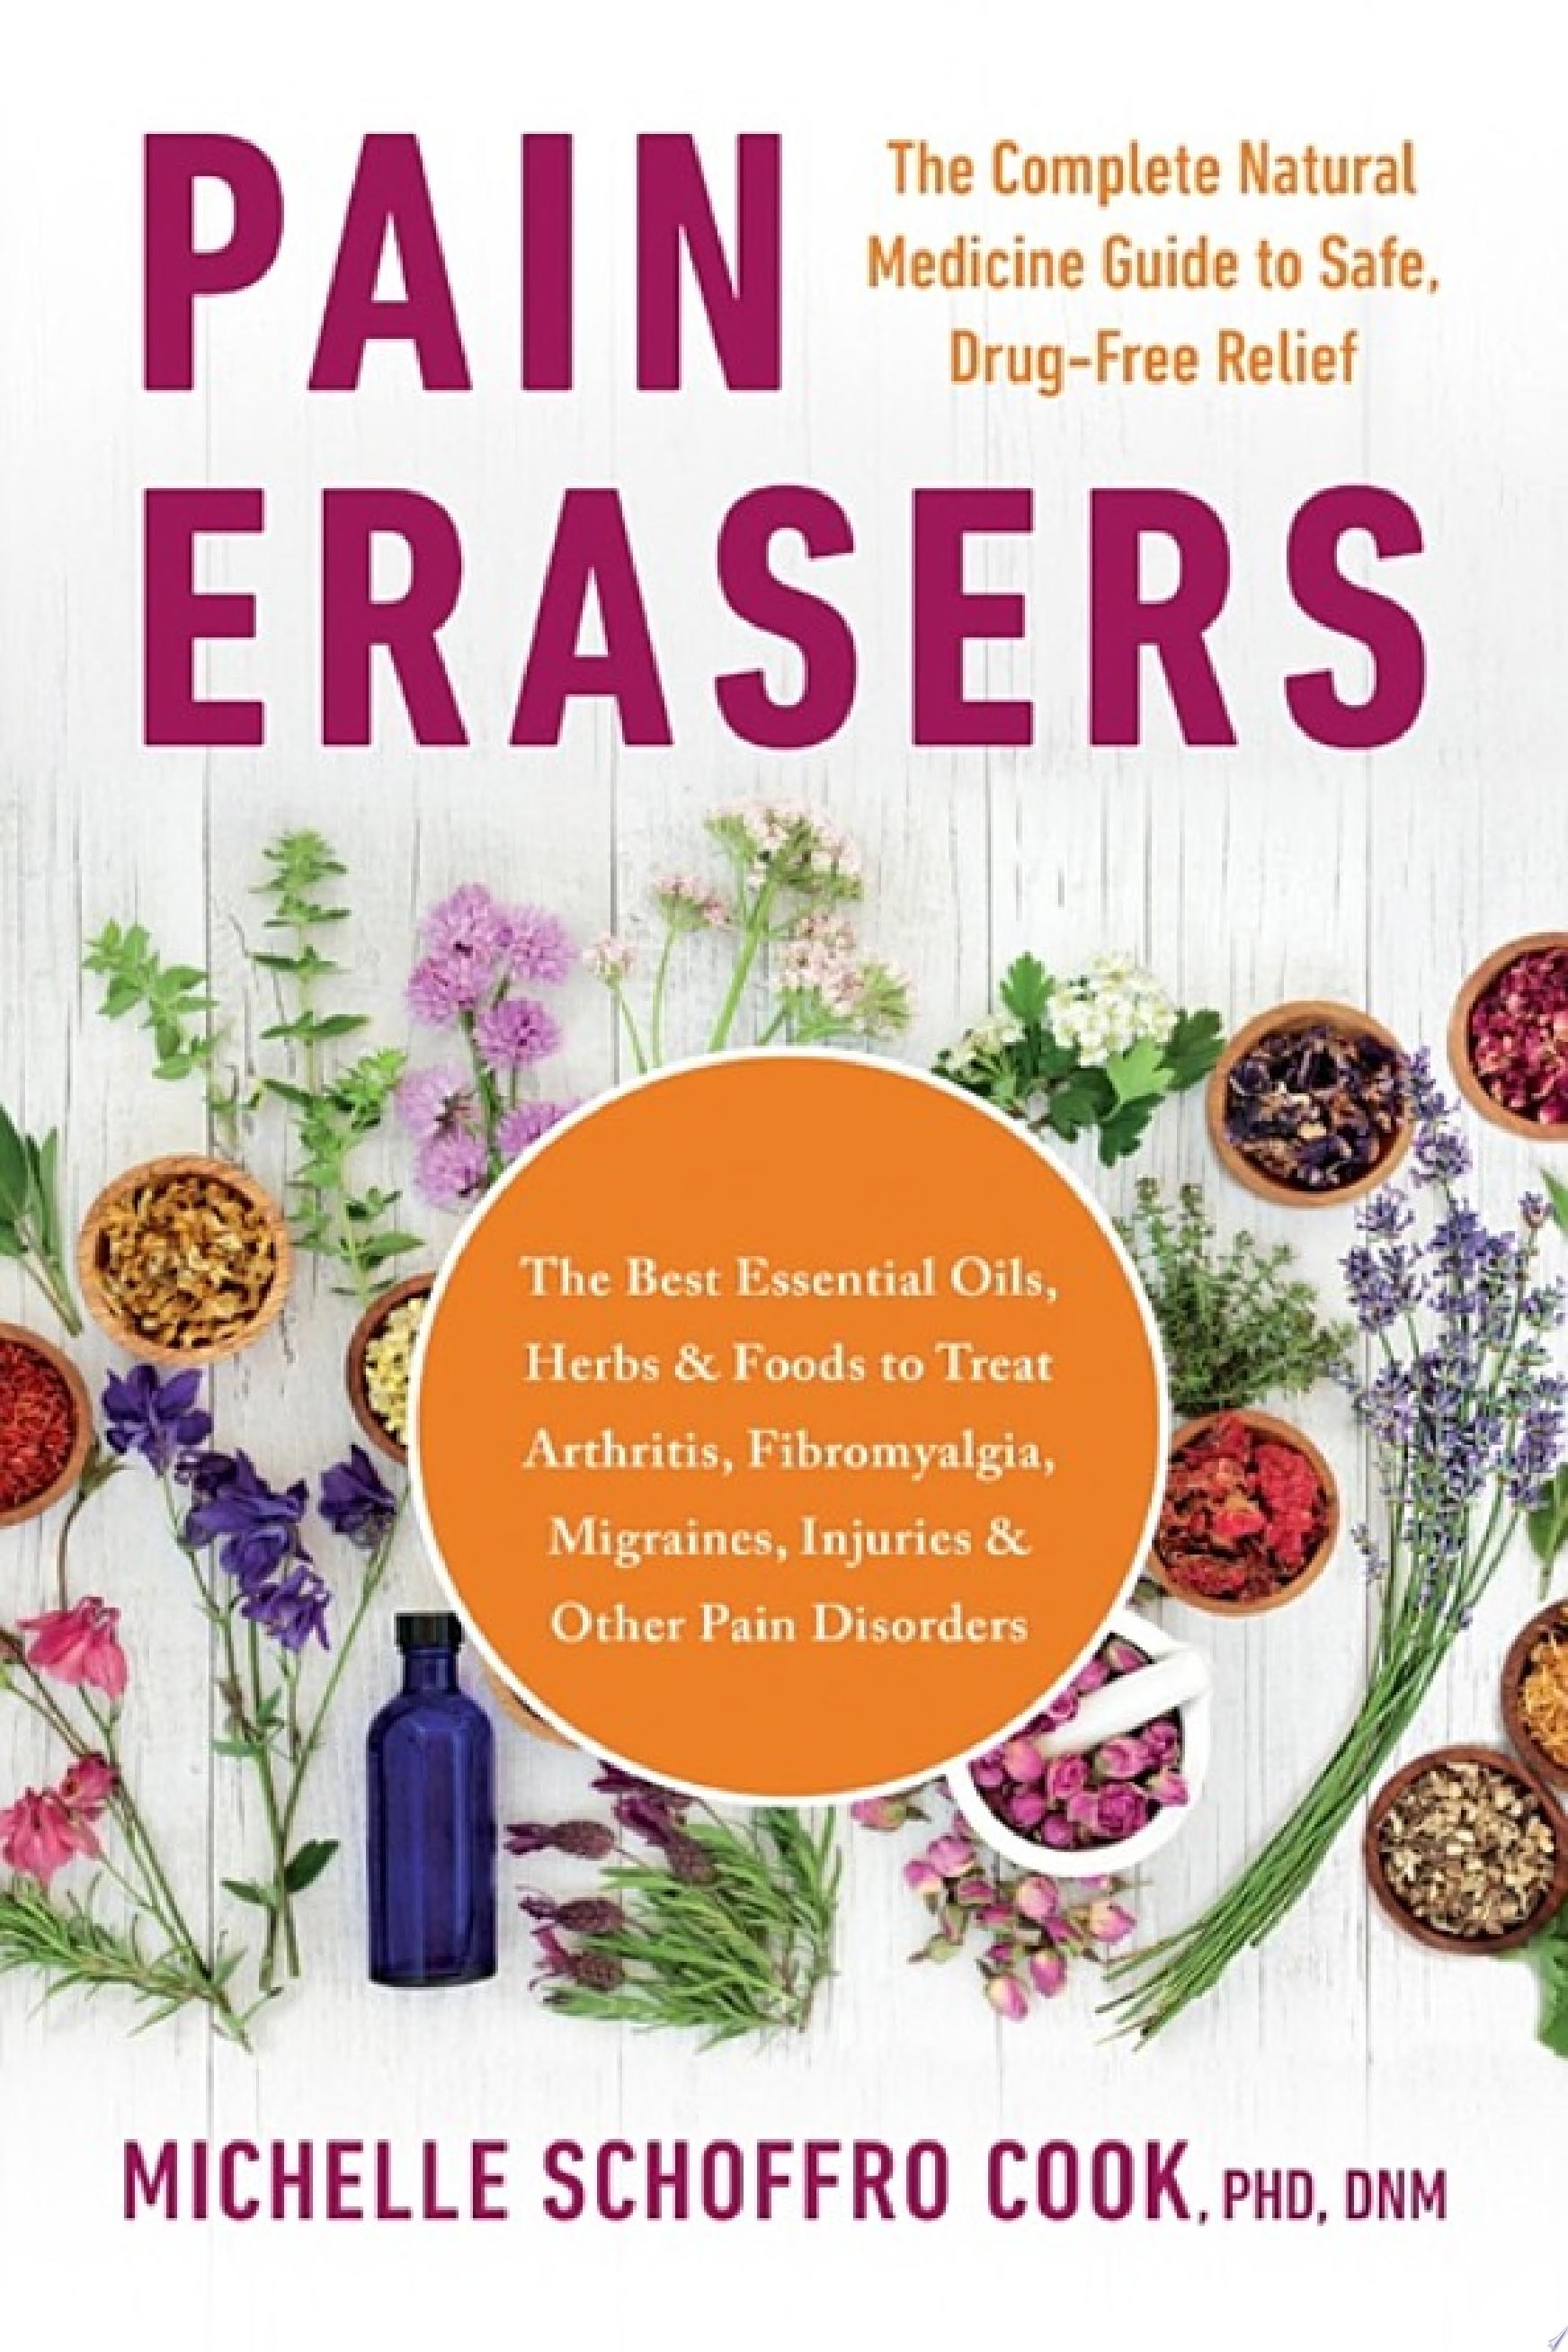 Image for "Pain Erasers"